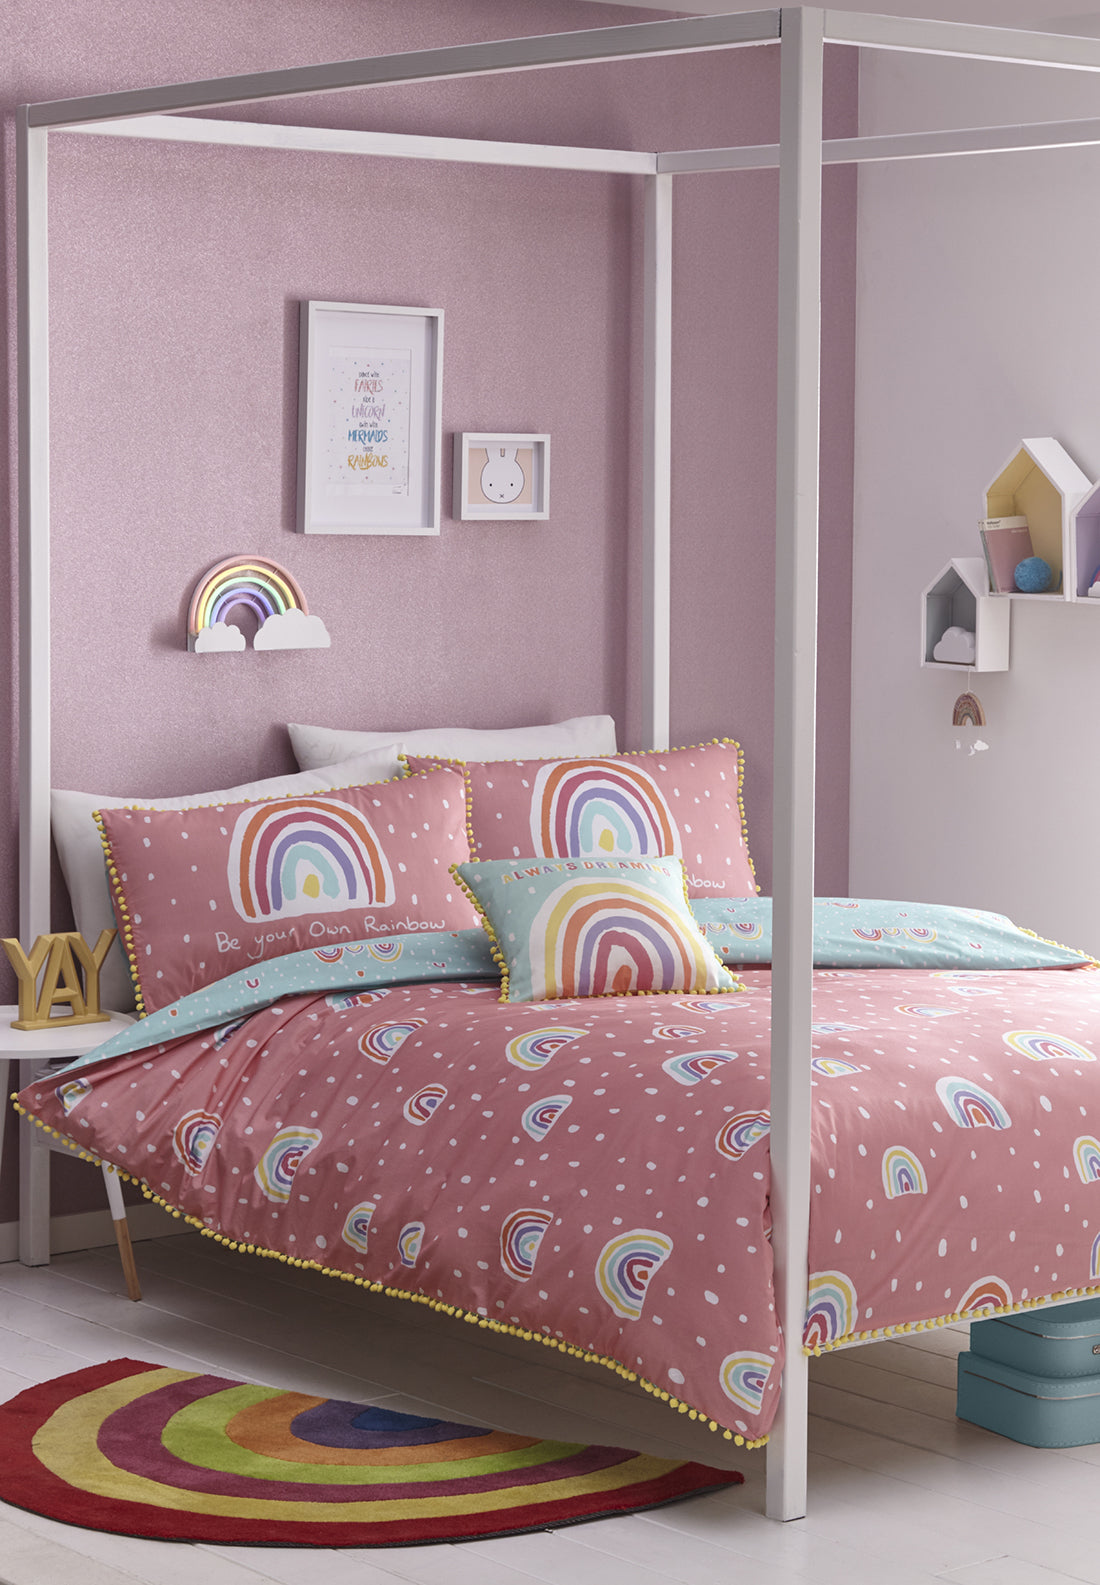 The Home Collection Over The Rainbow Duvet Cover Set 1 Shaws Department Stores